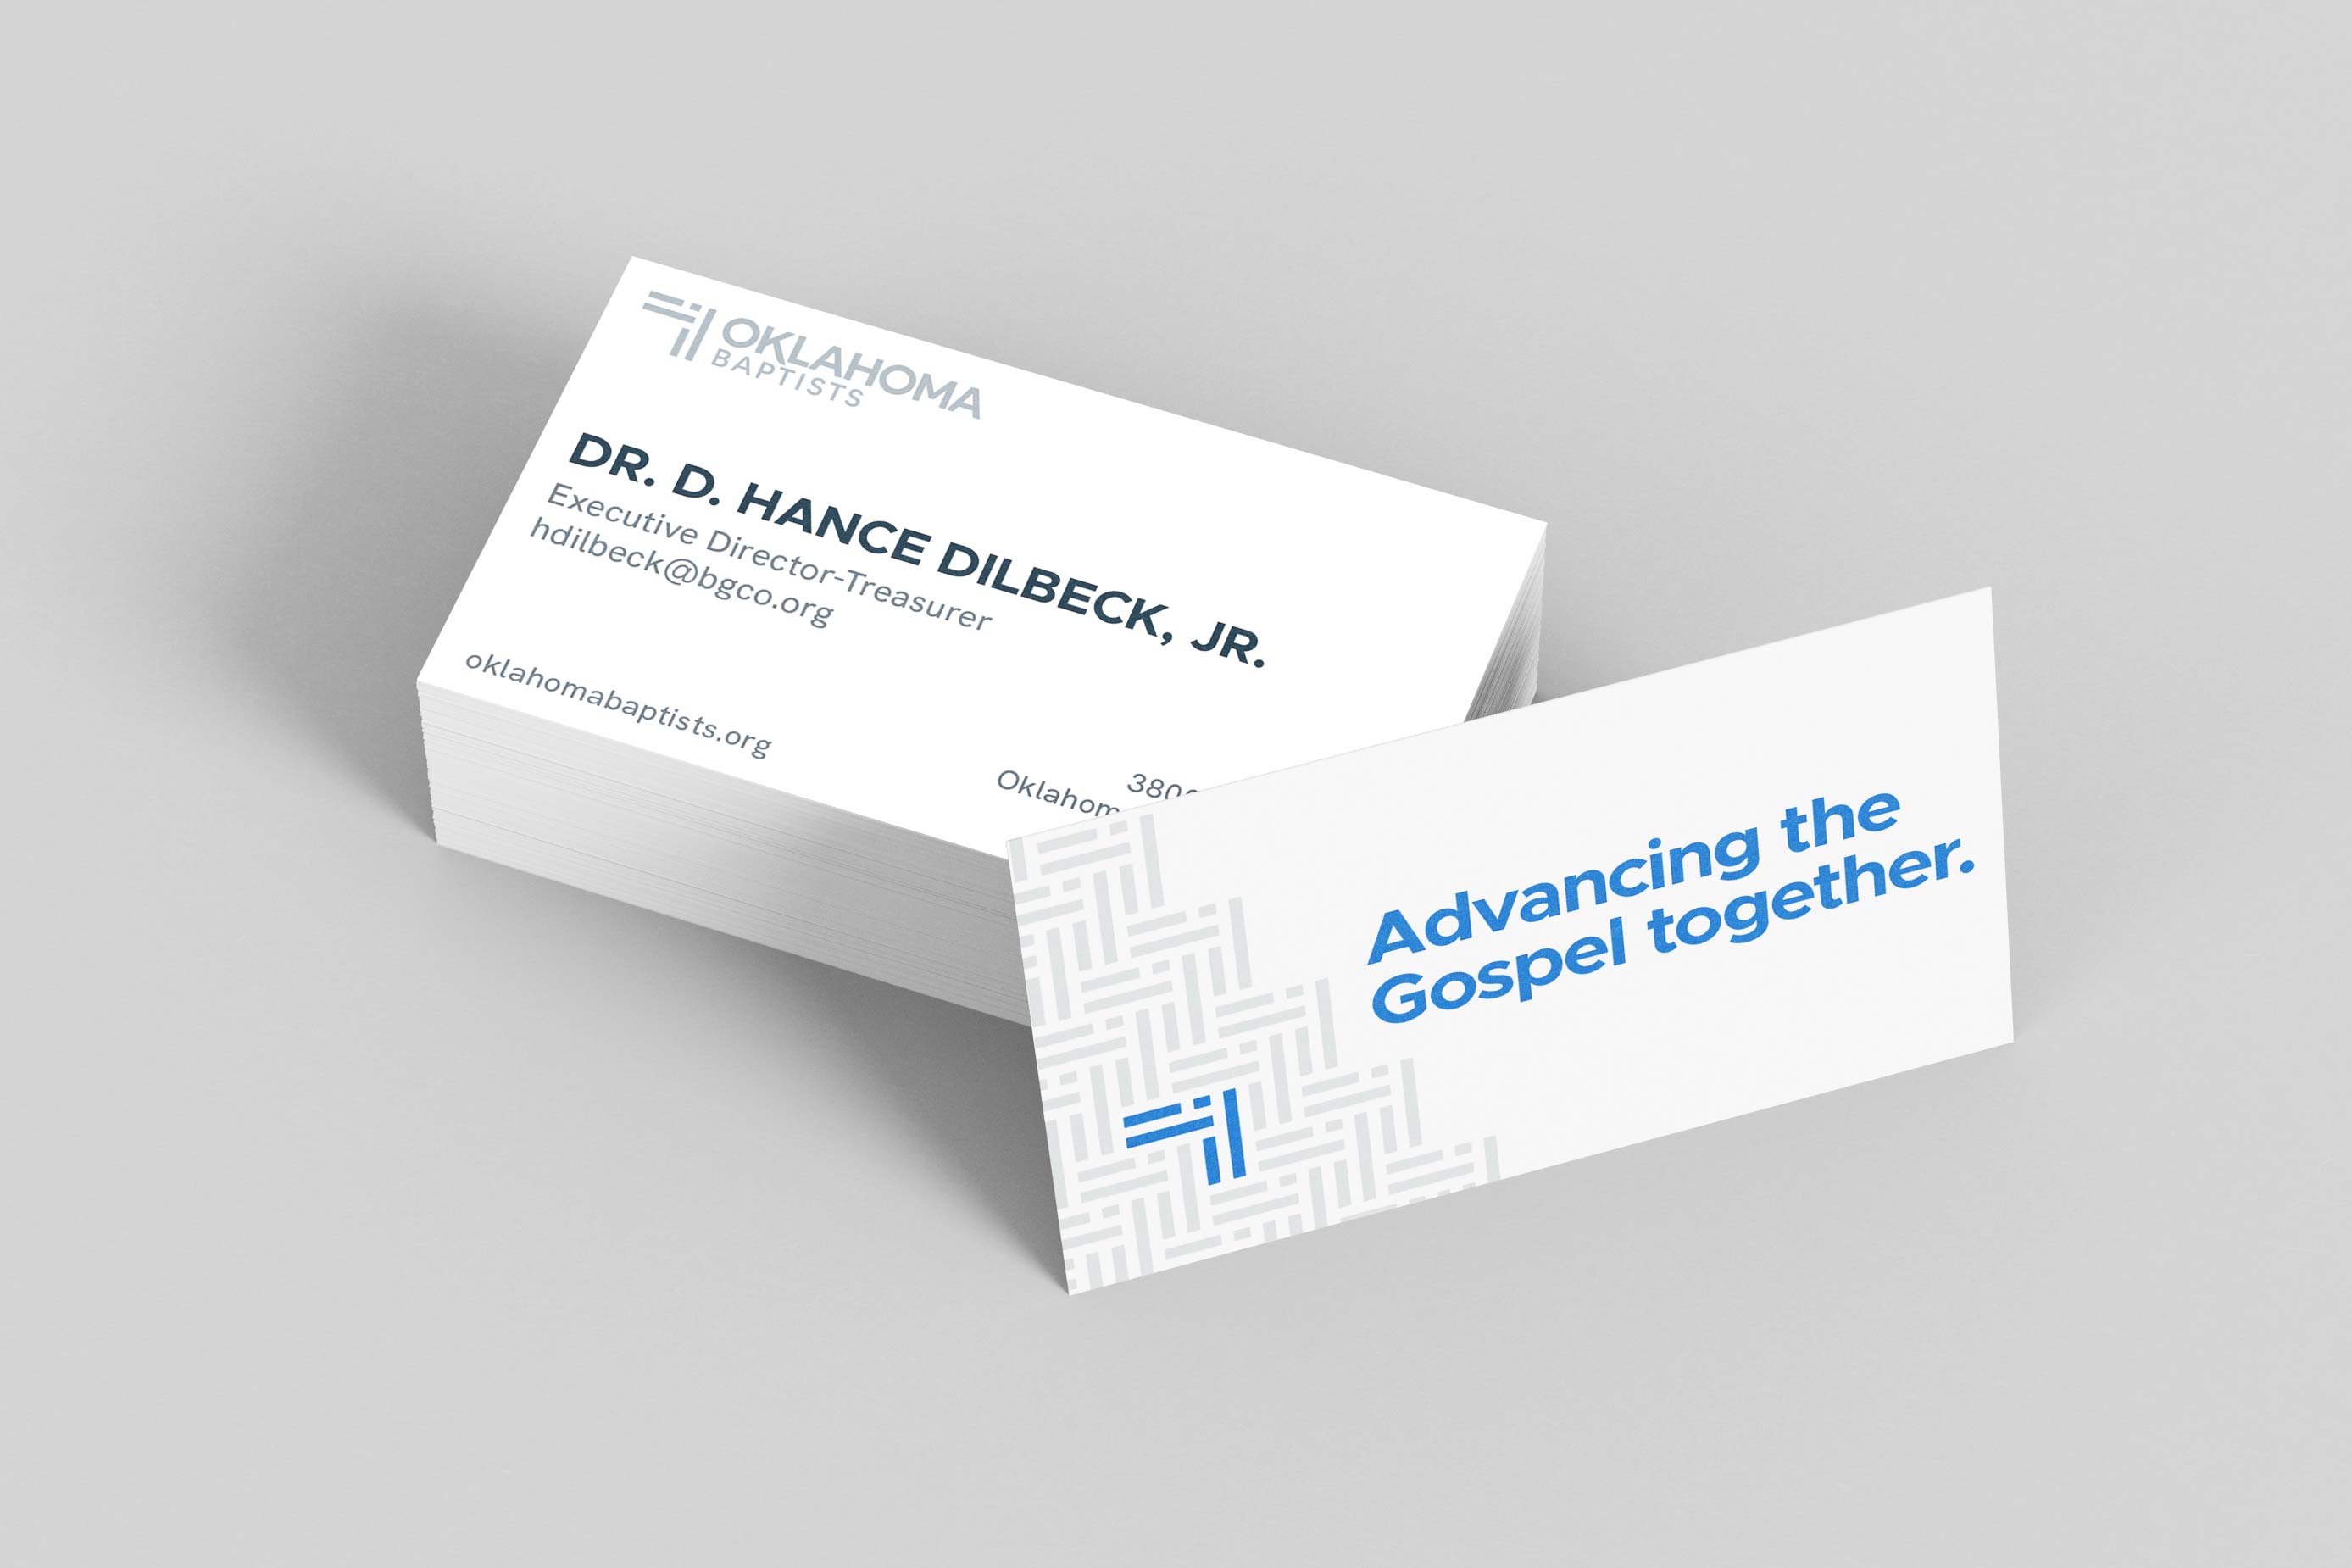 The business cards shared by Oklahoma Baptist Convention employees